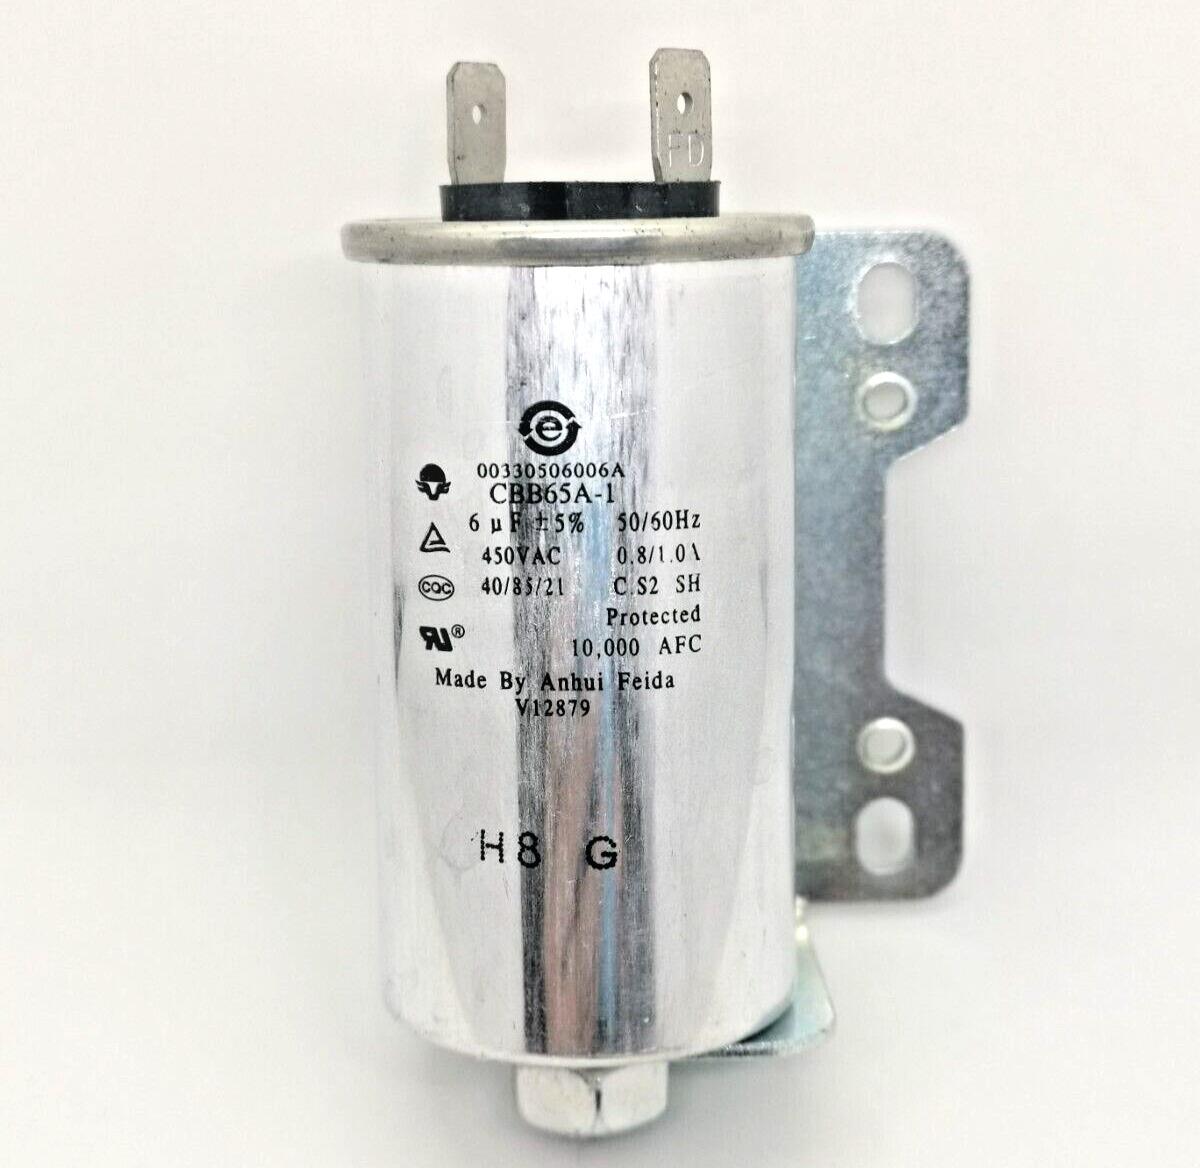 Haier Dryer Capacitor 6uf H00330506006a